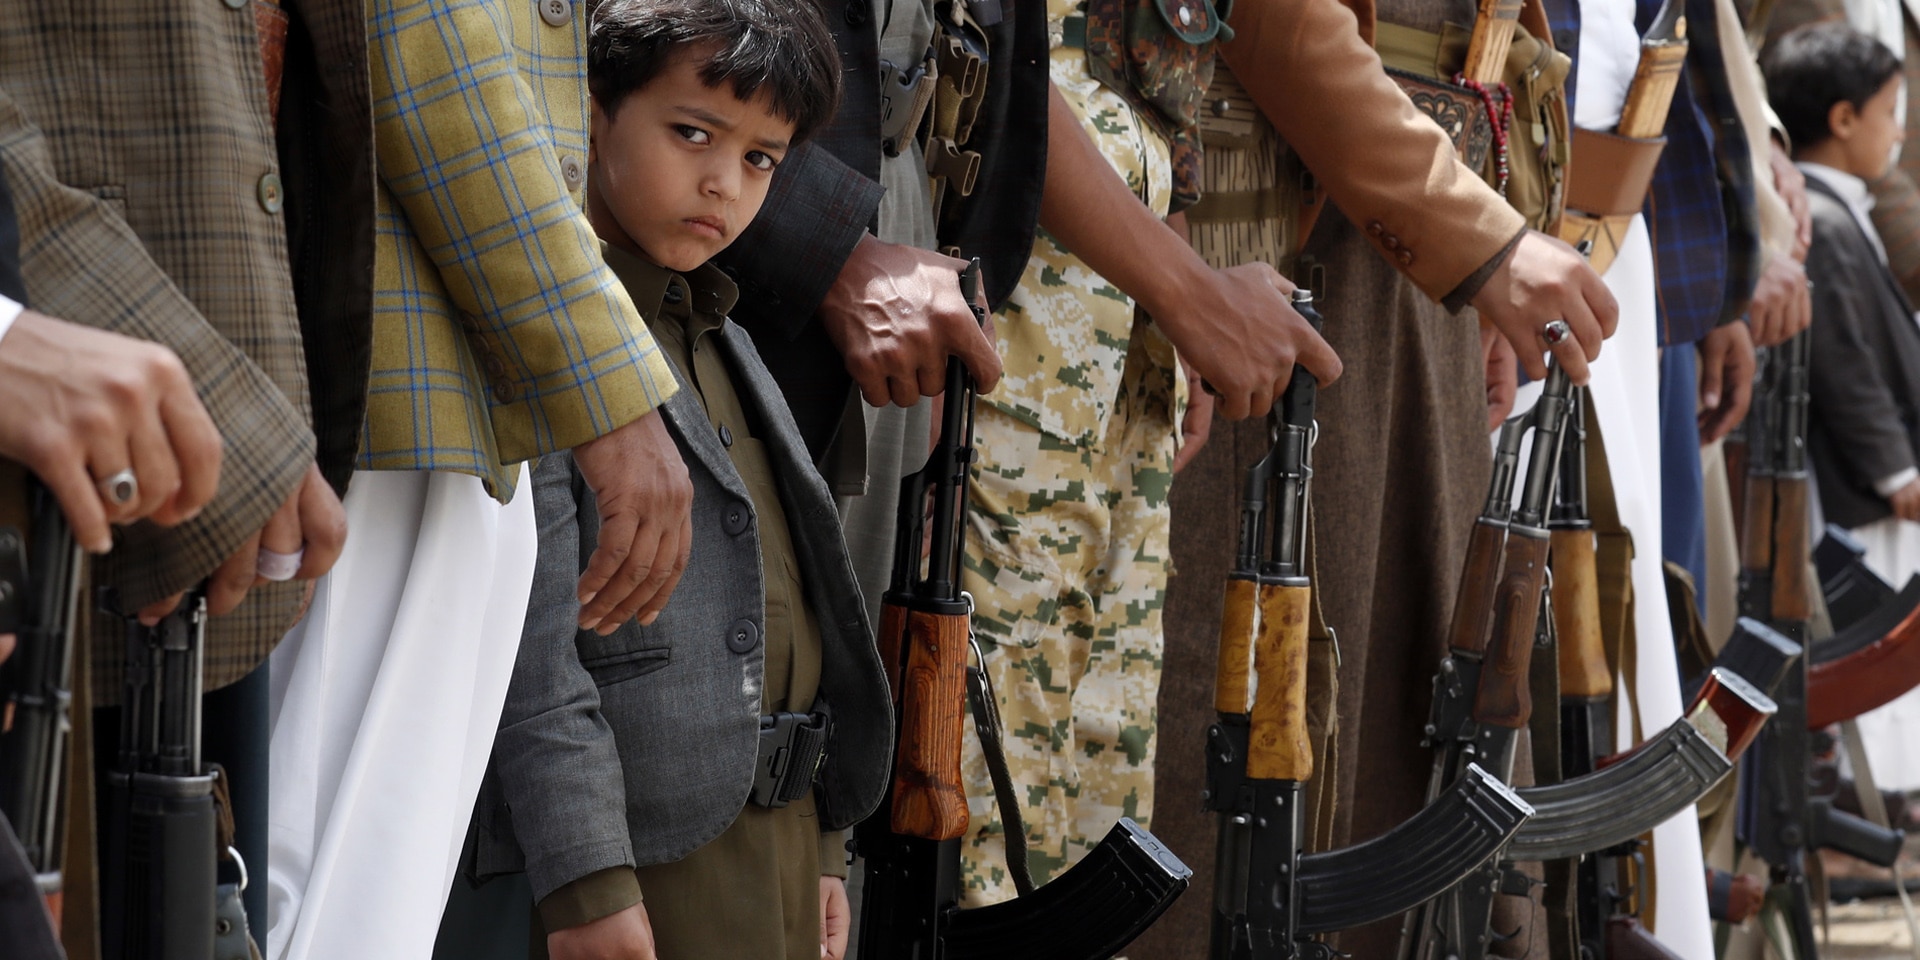 A Yemeni boy stands in a line of adults holding guns.